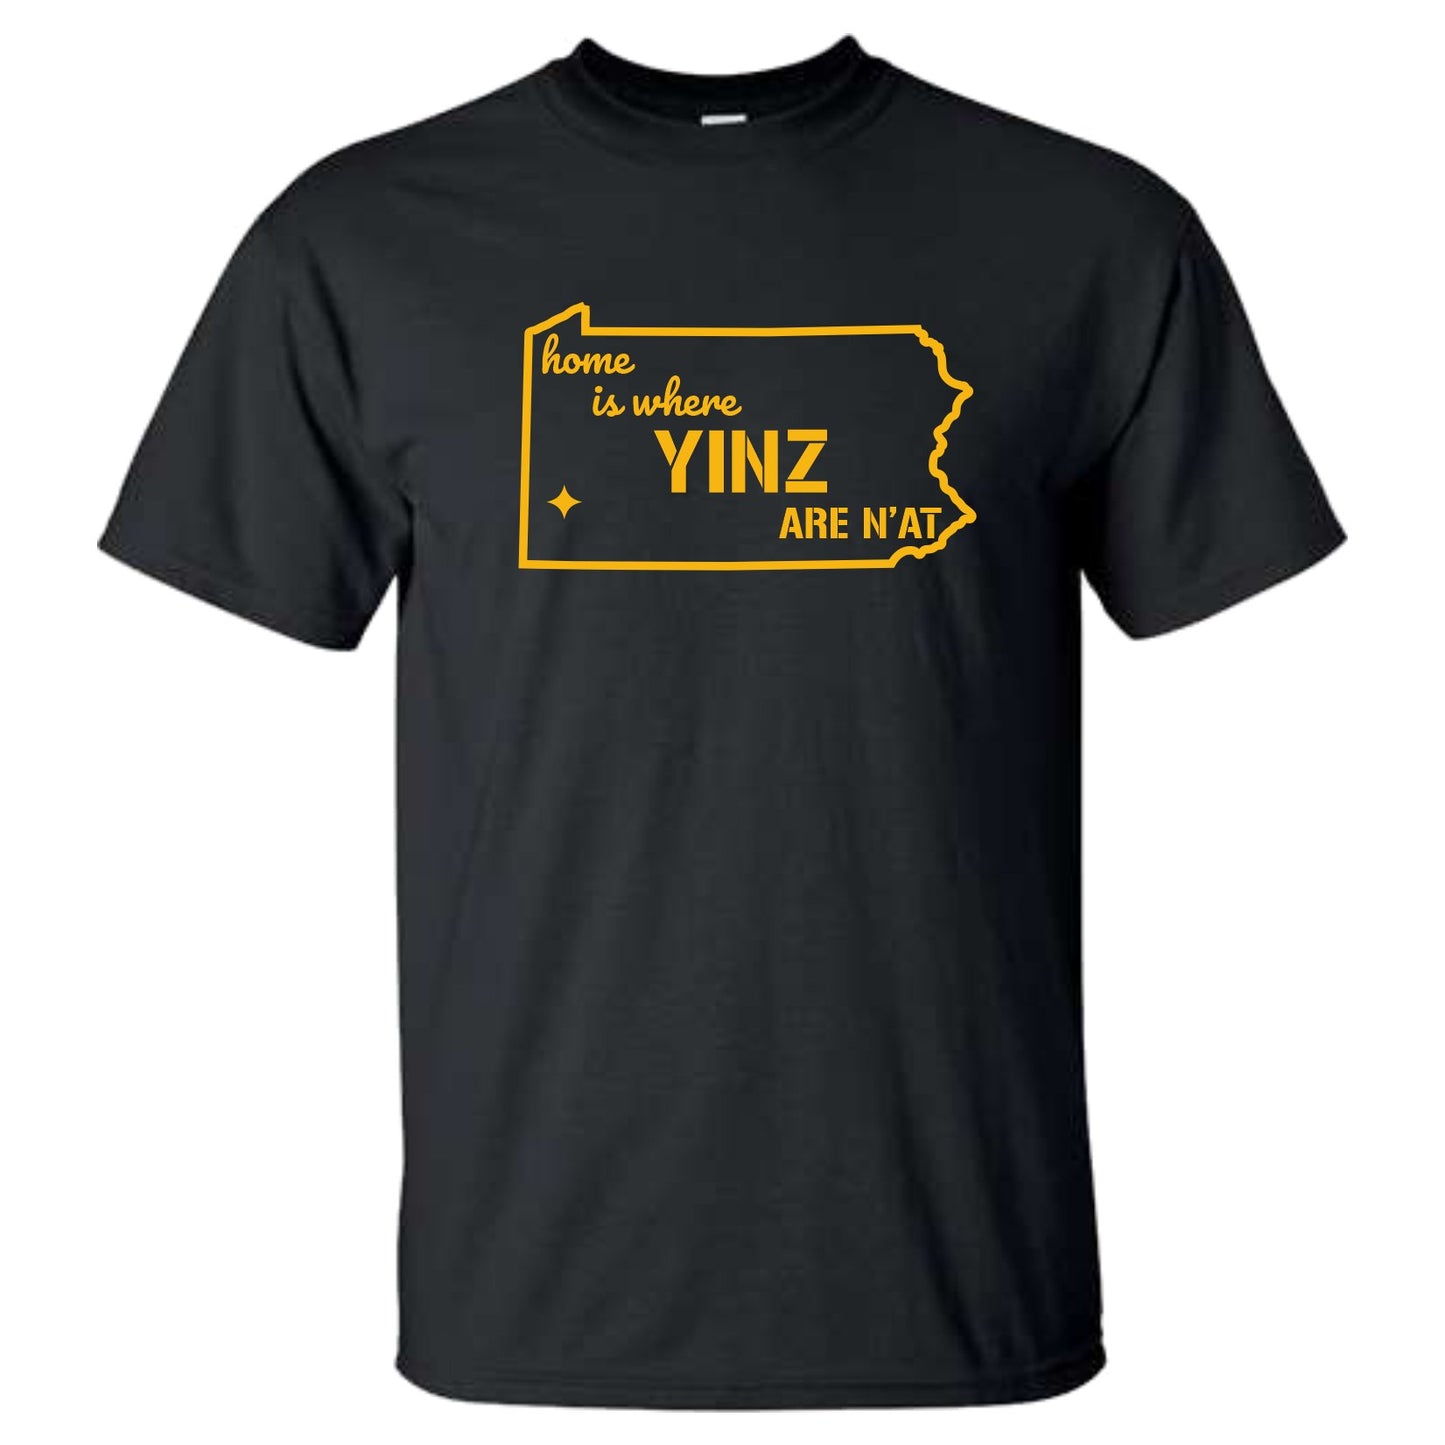 Home is Where YINZ are N'at T Shirt - Youth and Adult Sizes - SBS T Shop